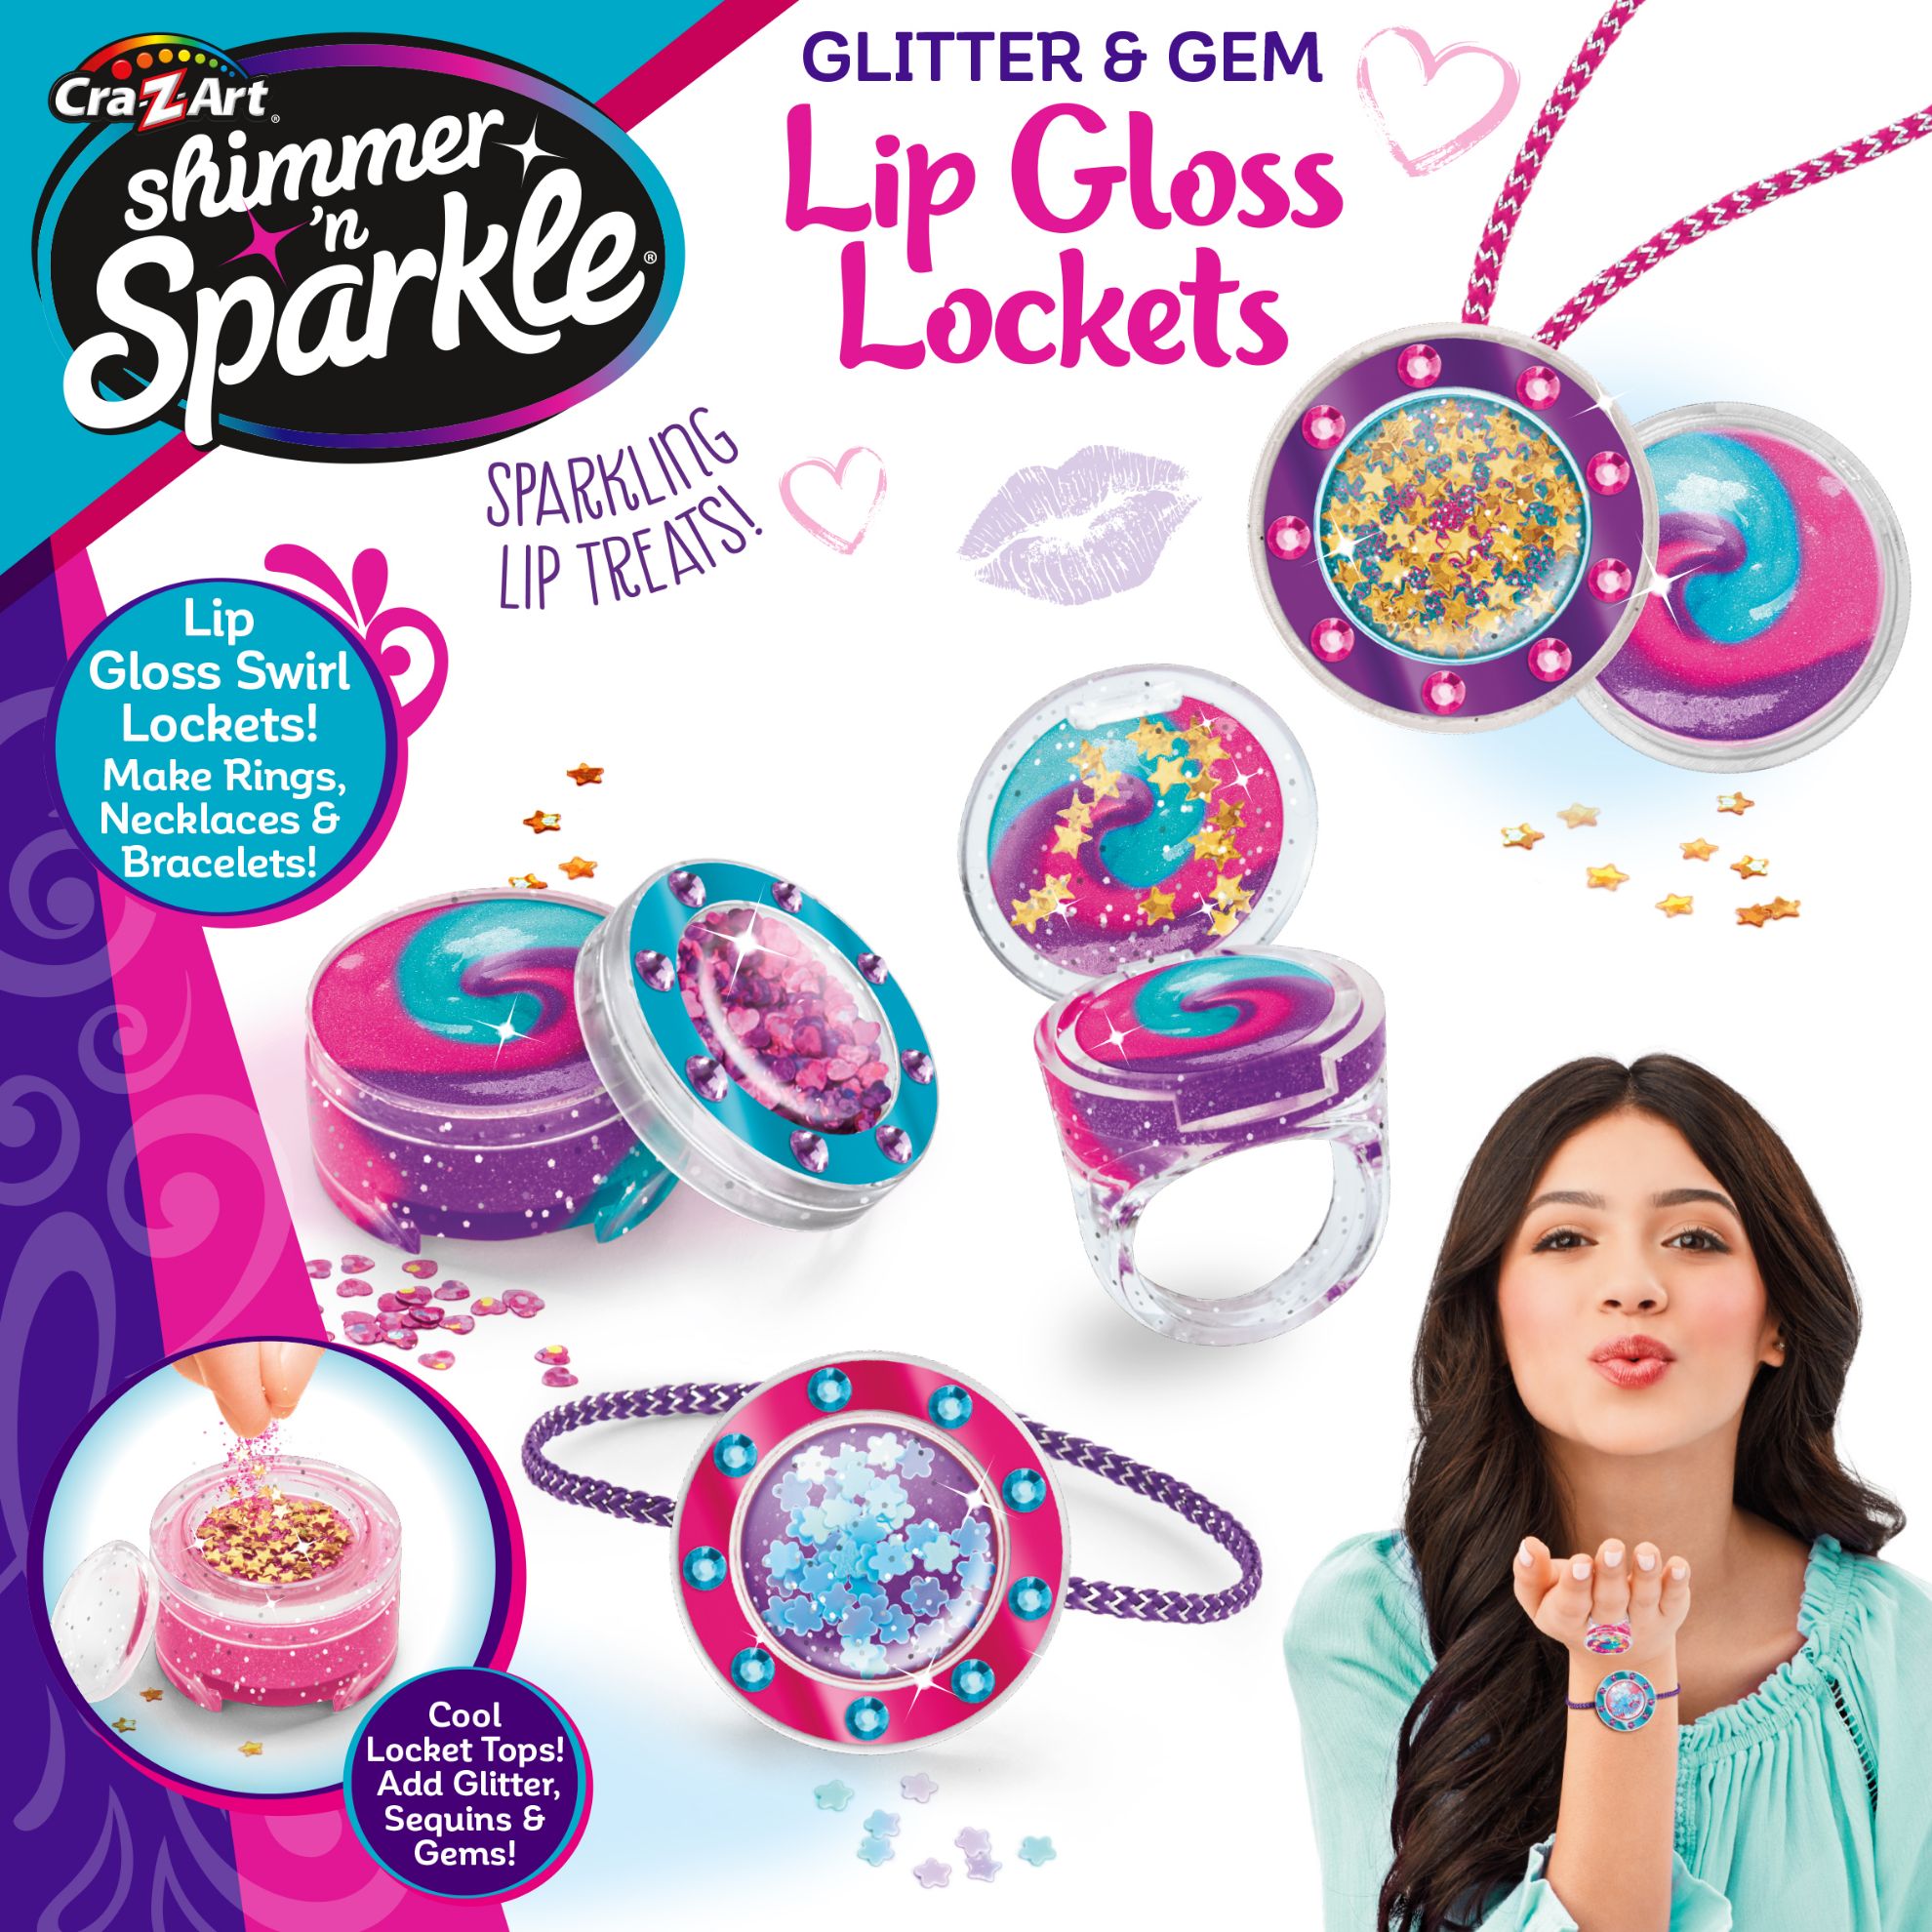 Picture of Shimmer N Sparkle Glitter and Gem Lip Gloss Lockets